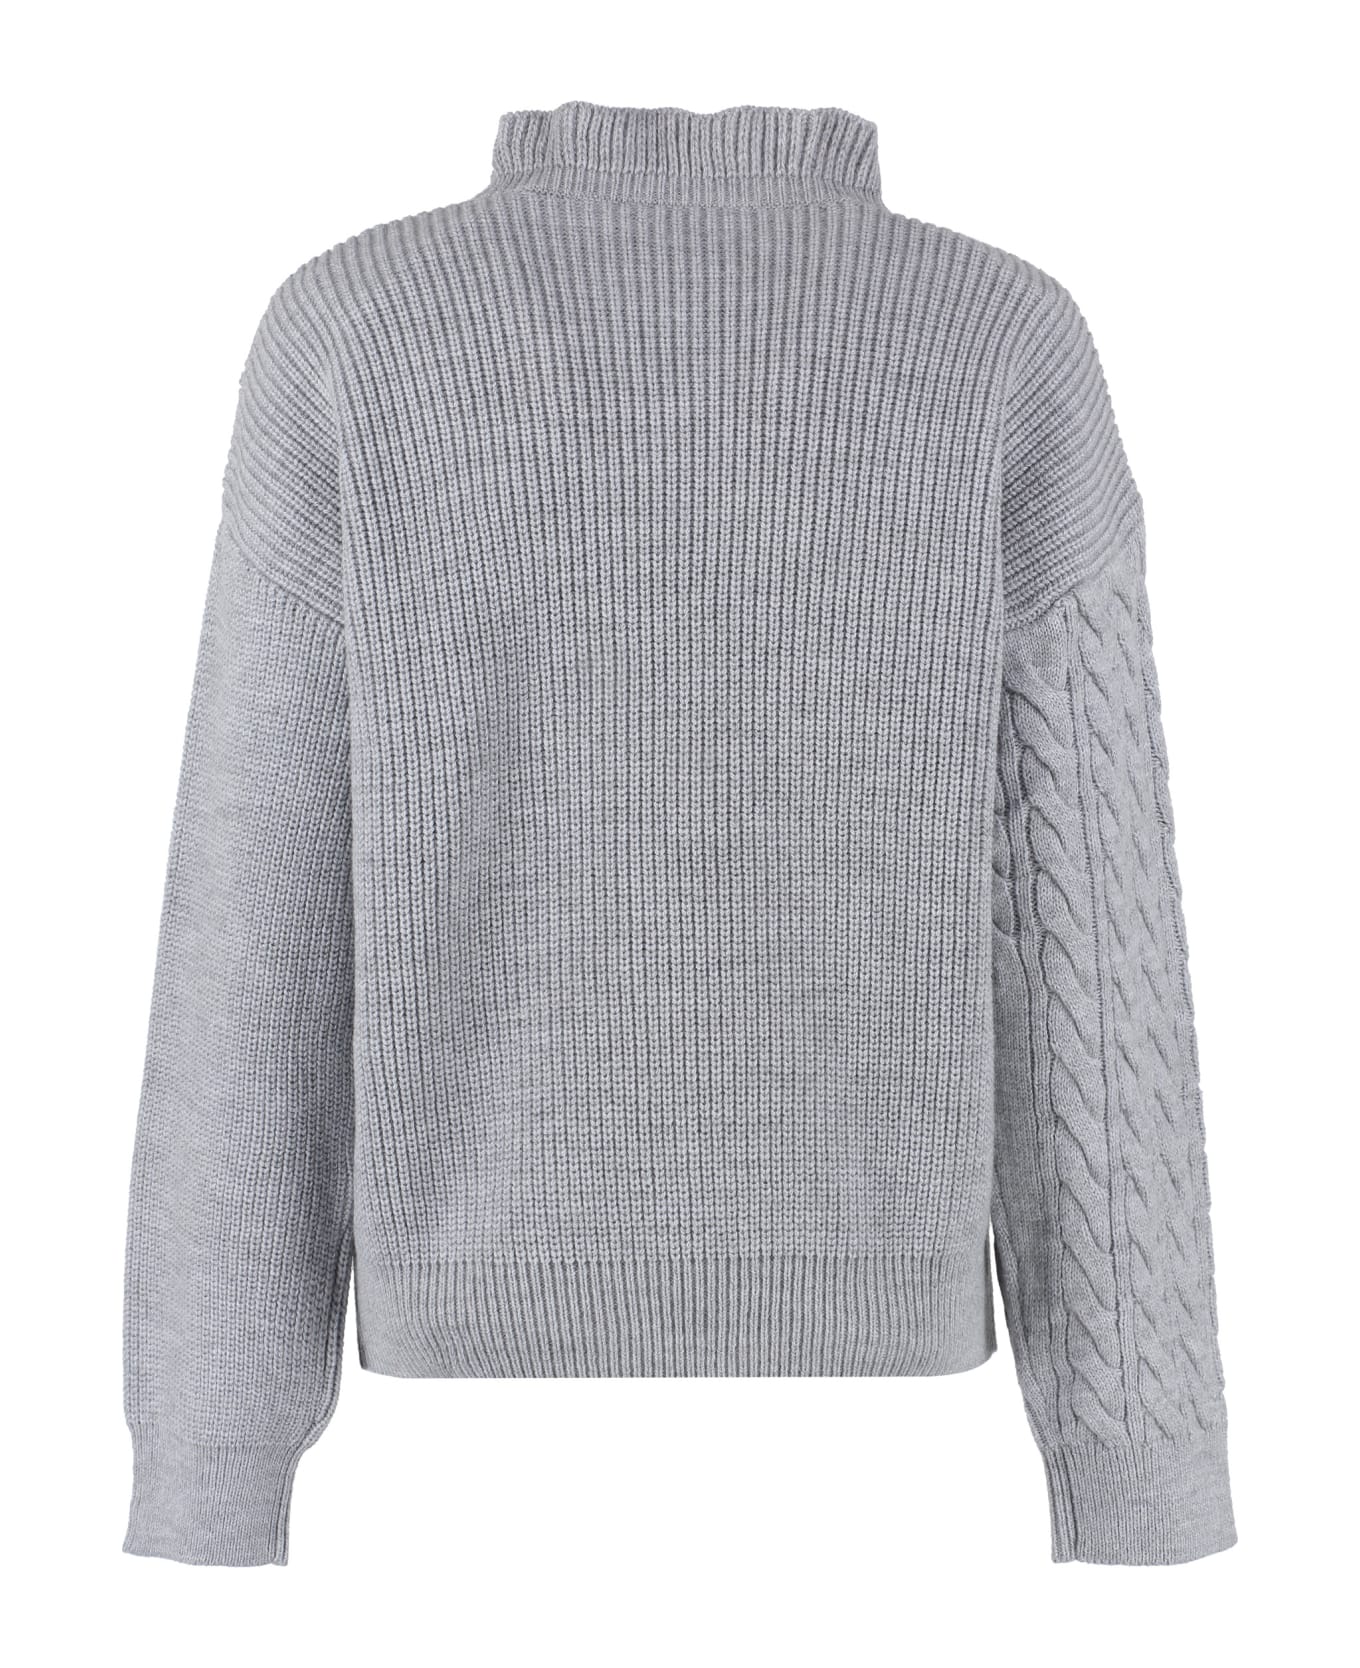 MSGM Frilled Wool-blend Sweater - grey